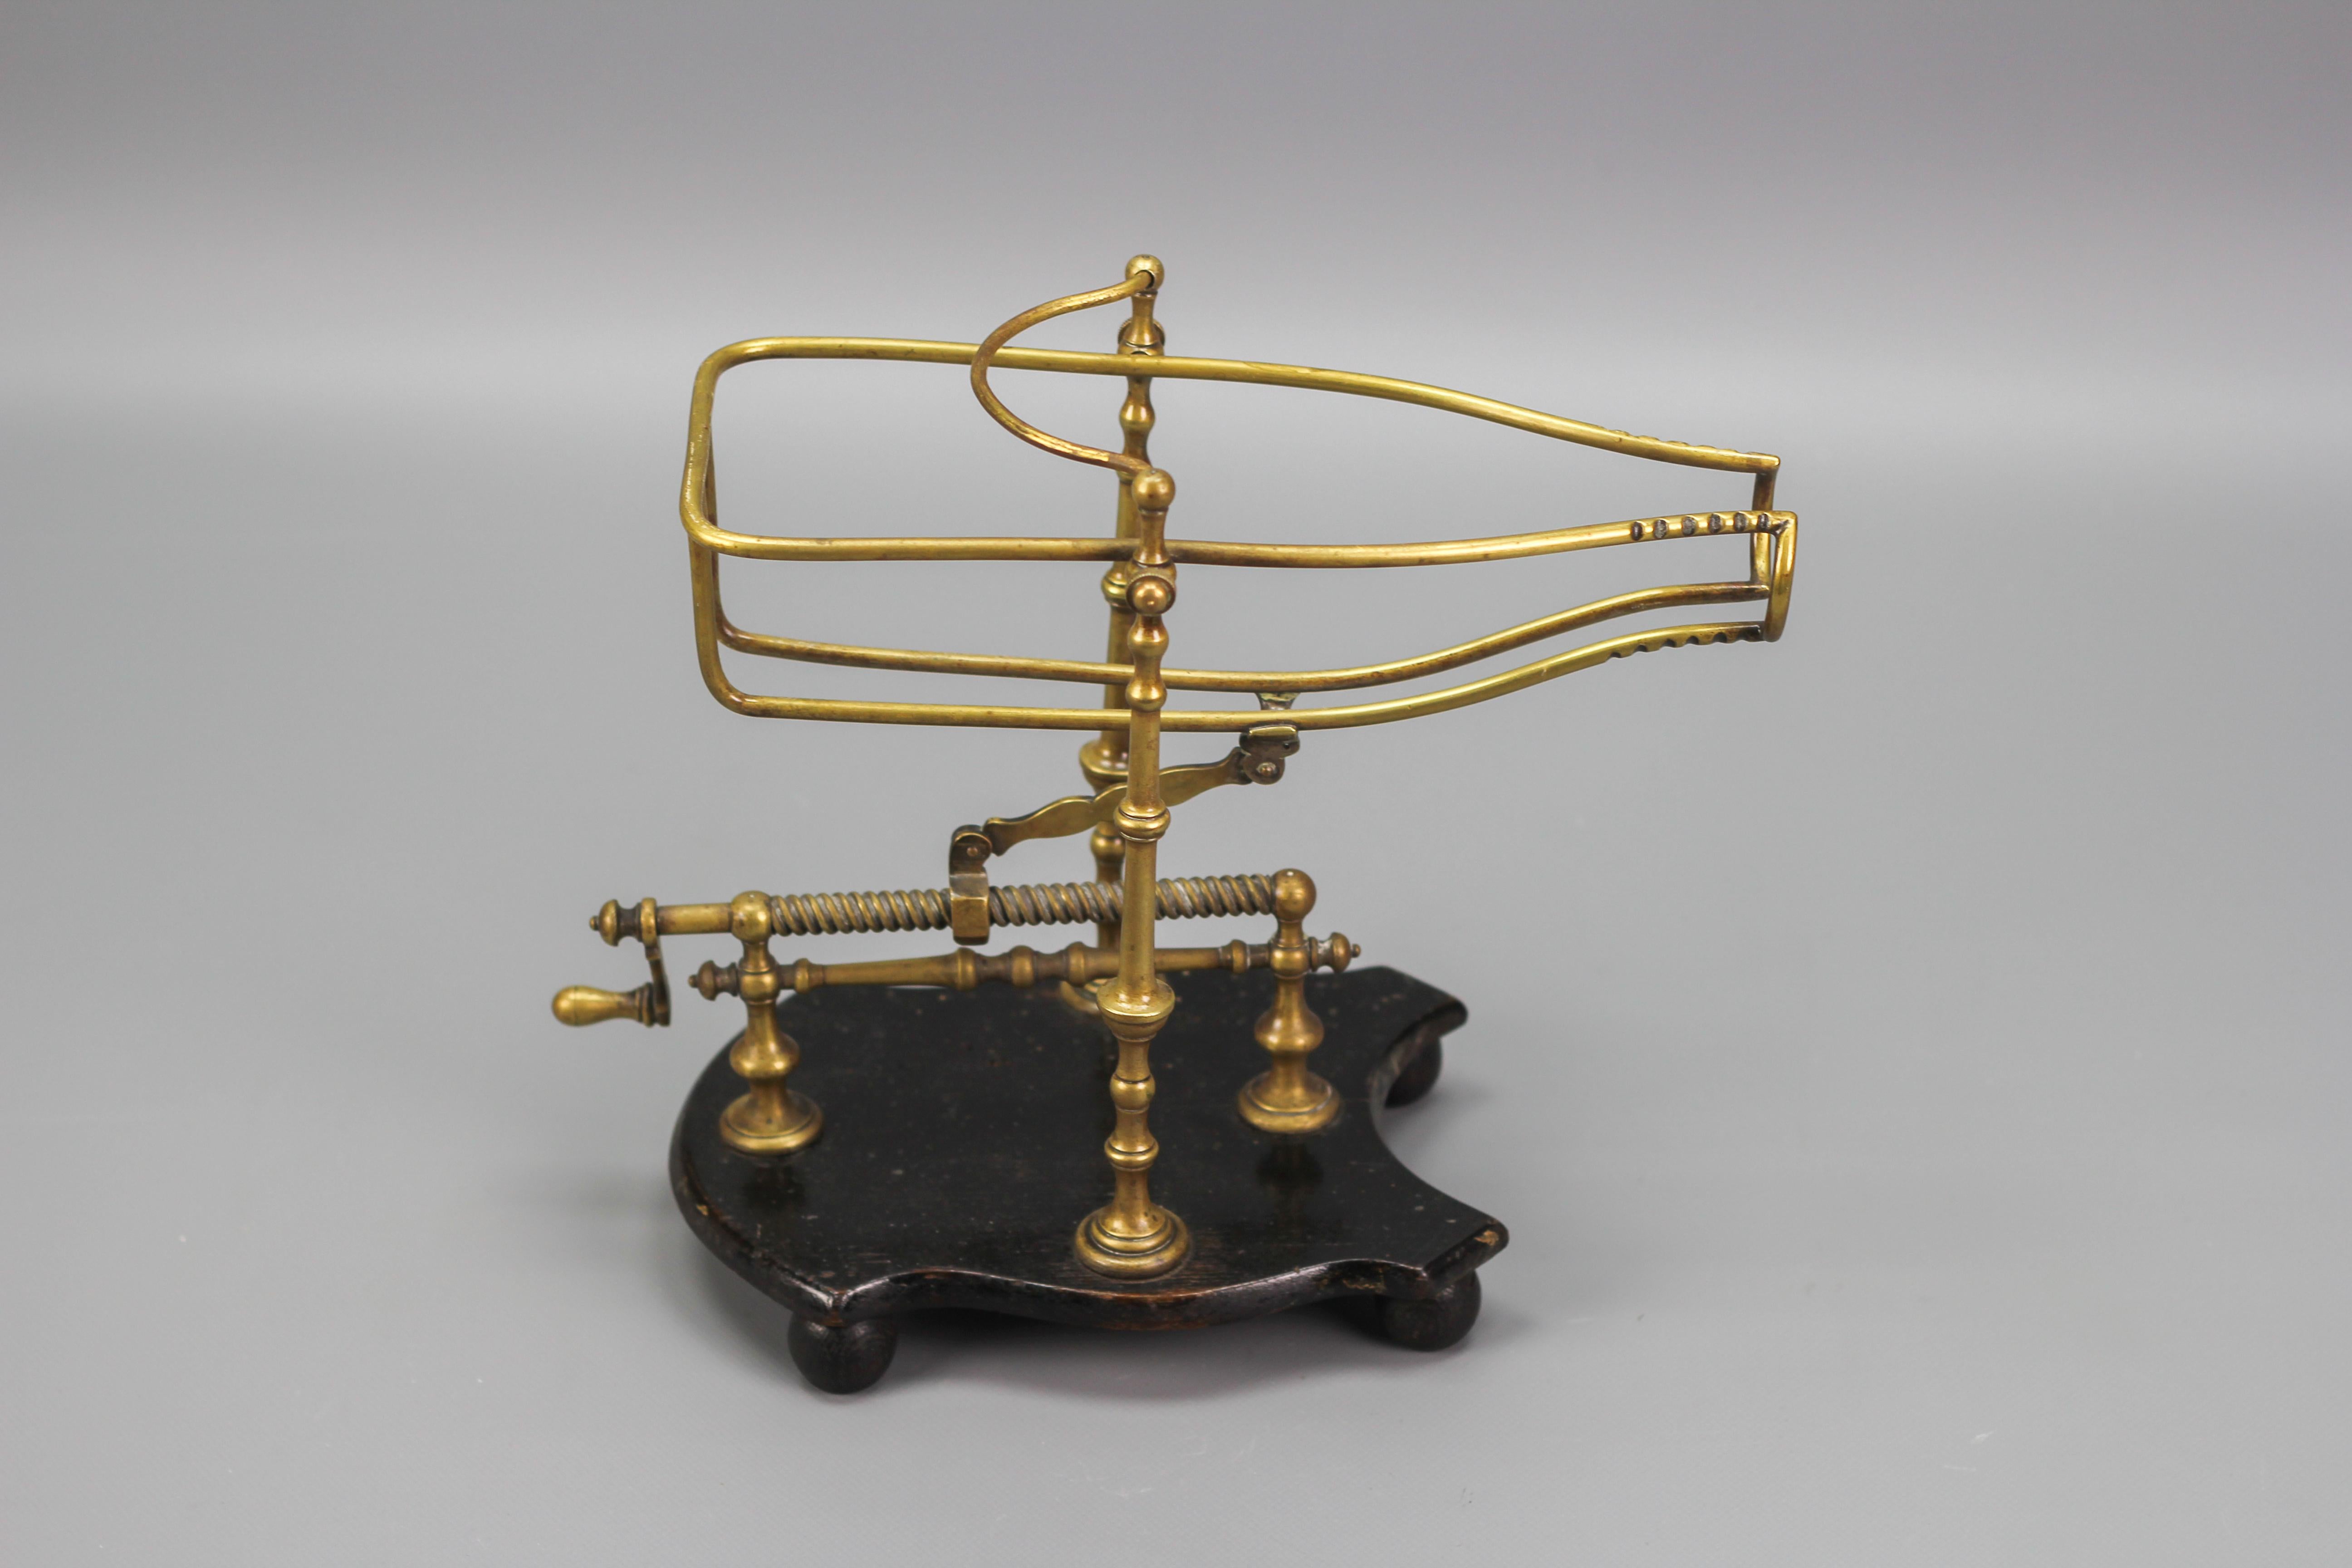 This brilliant device made in France circa the 1920s holds a bottle in a cradle attached to an adjustable spindle-turning handle. It is mounted on a shaped wooden base on four round feet. The cradle serves the purpose of pouring wine or other